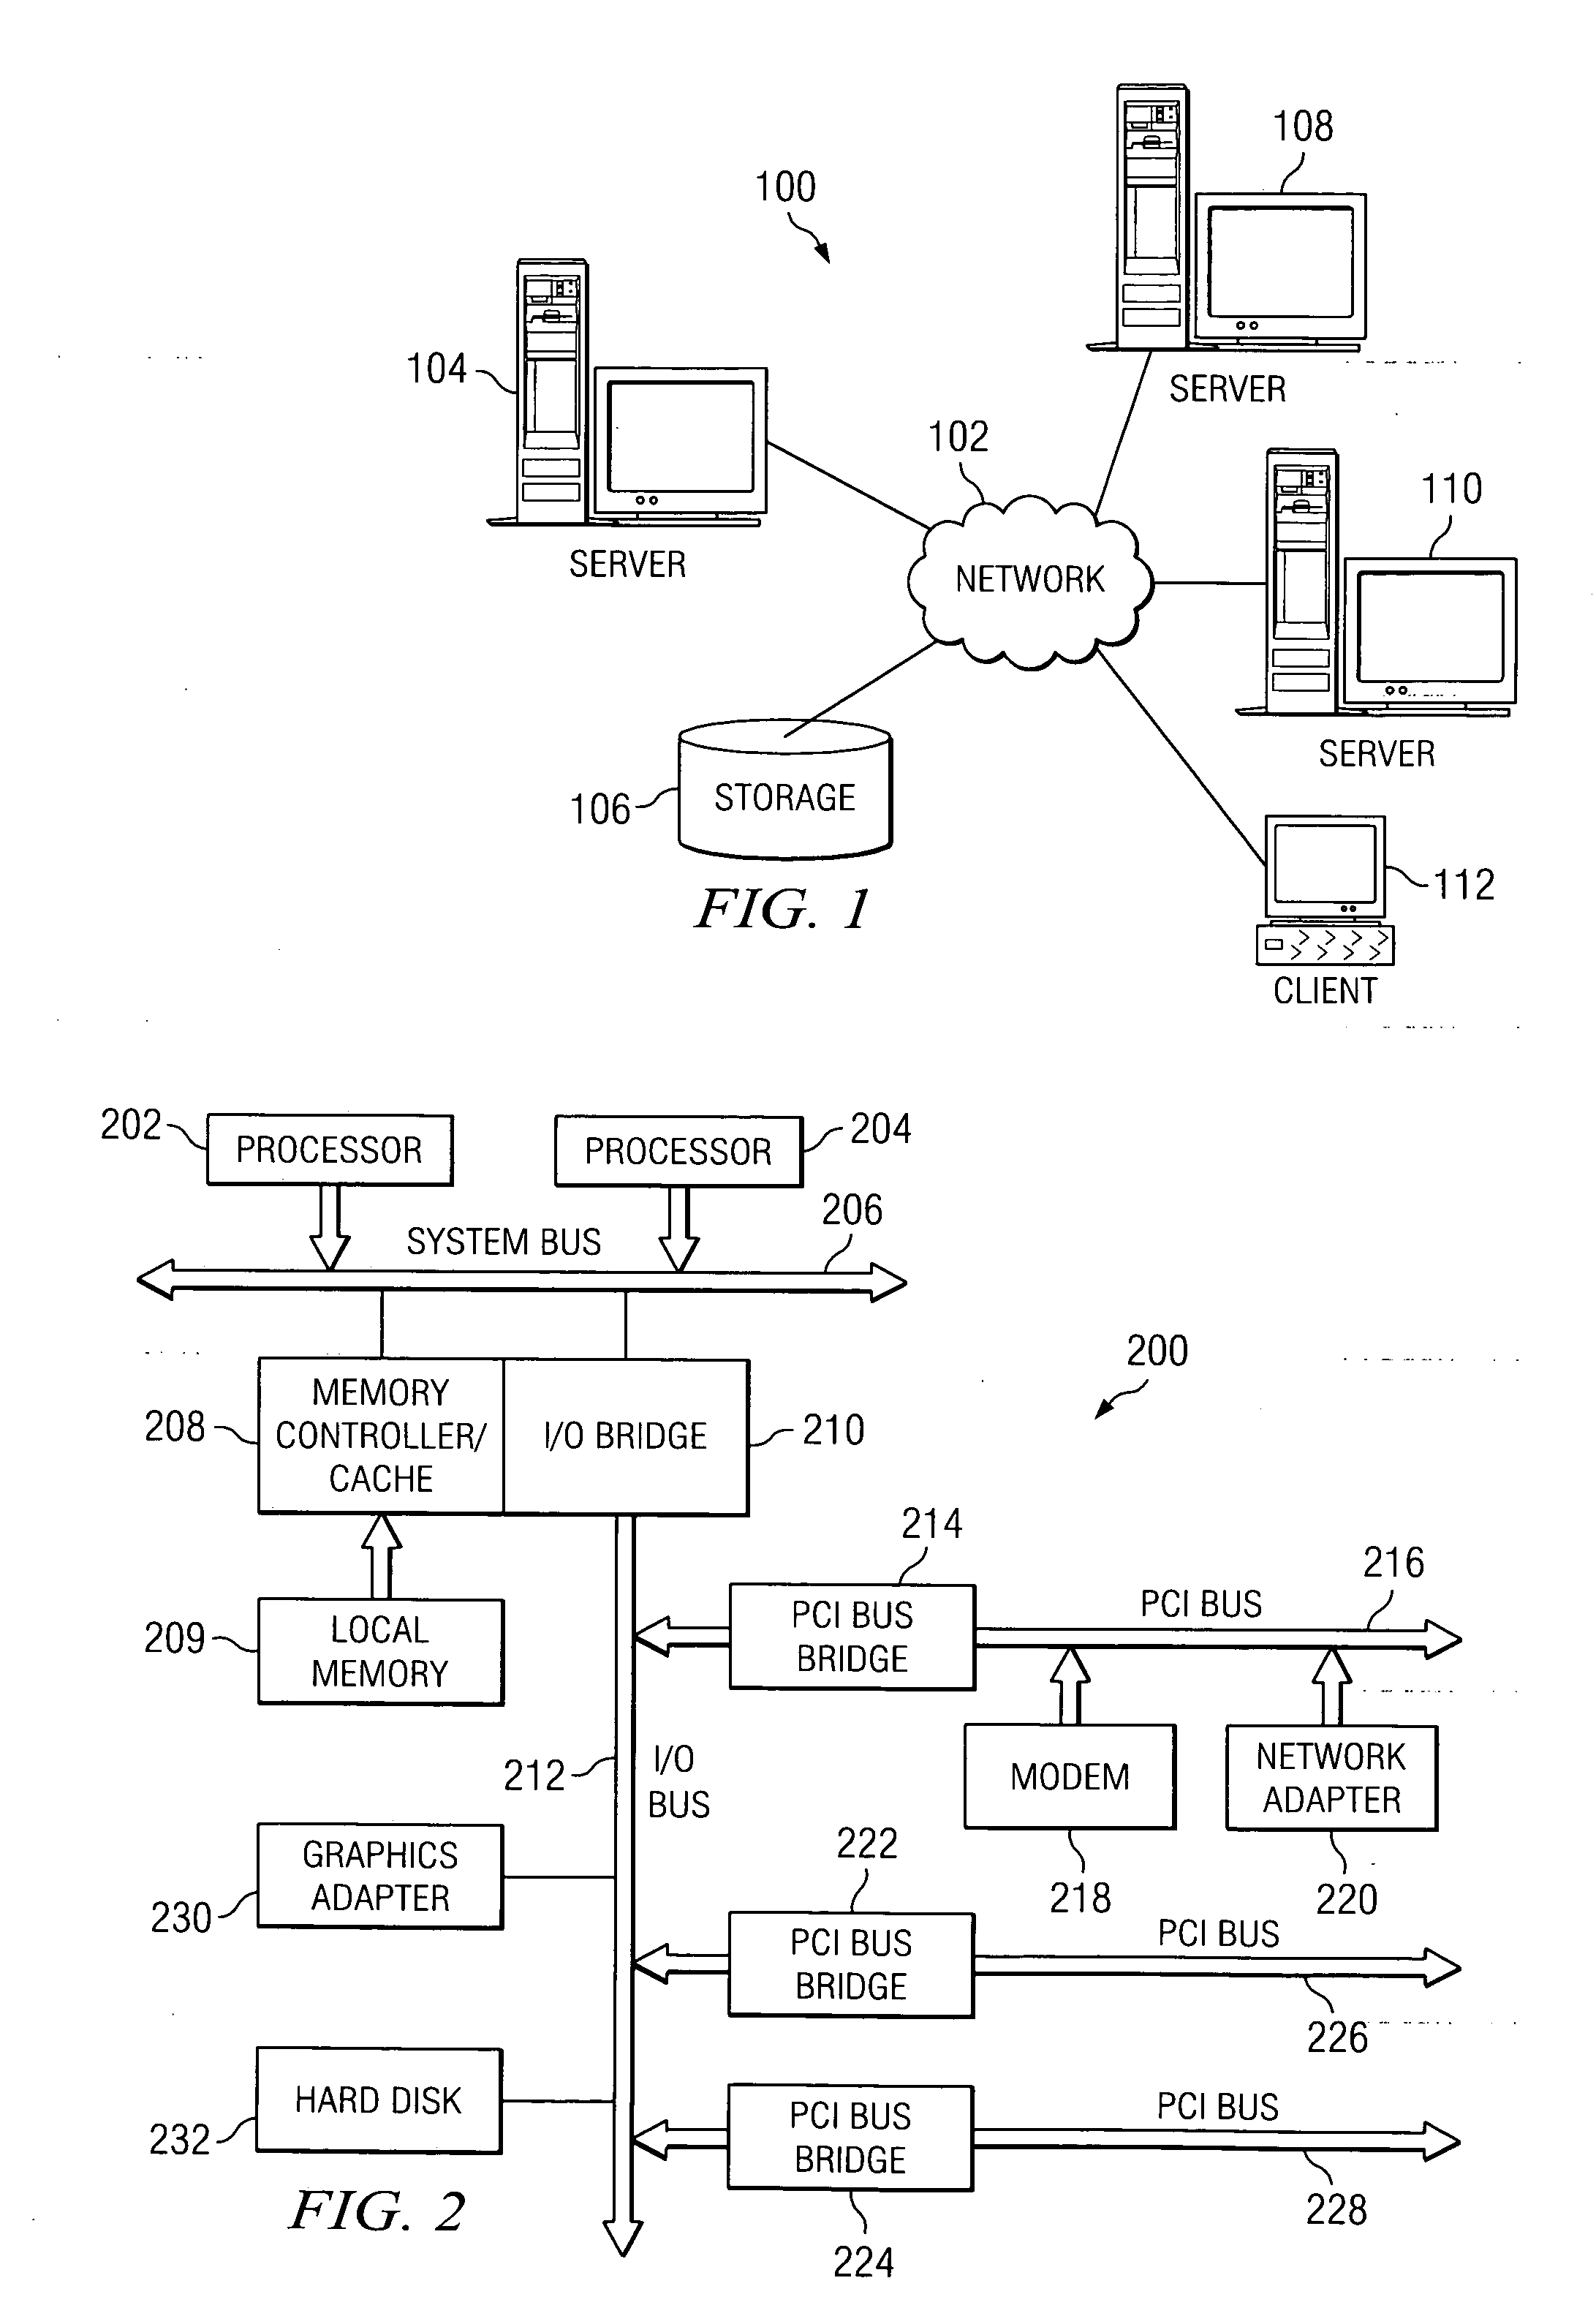 Apparatus and method for determining load balancing weights using application instance statistical information